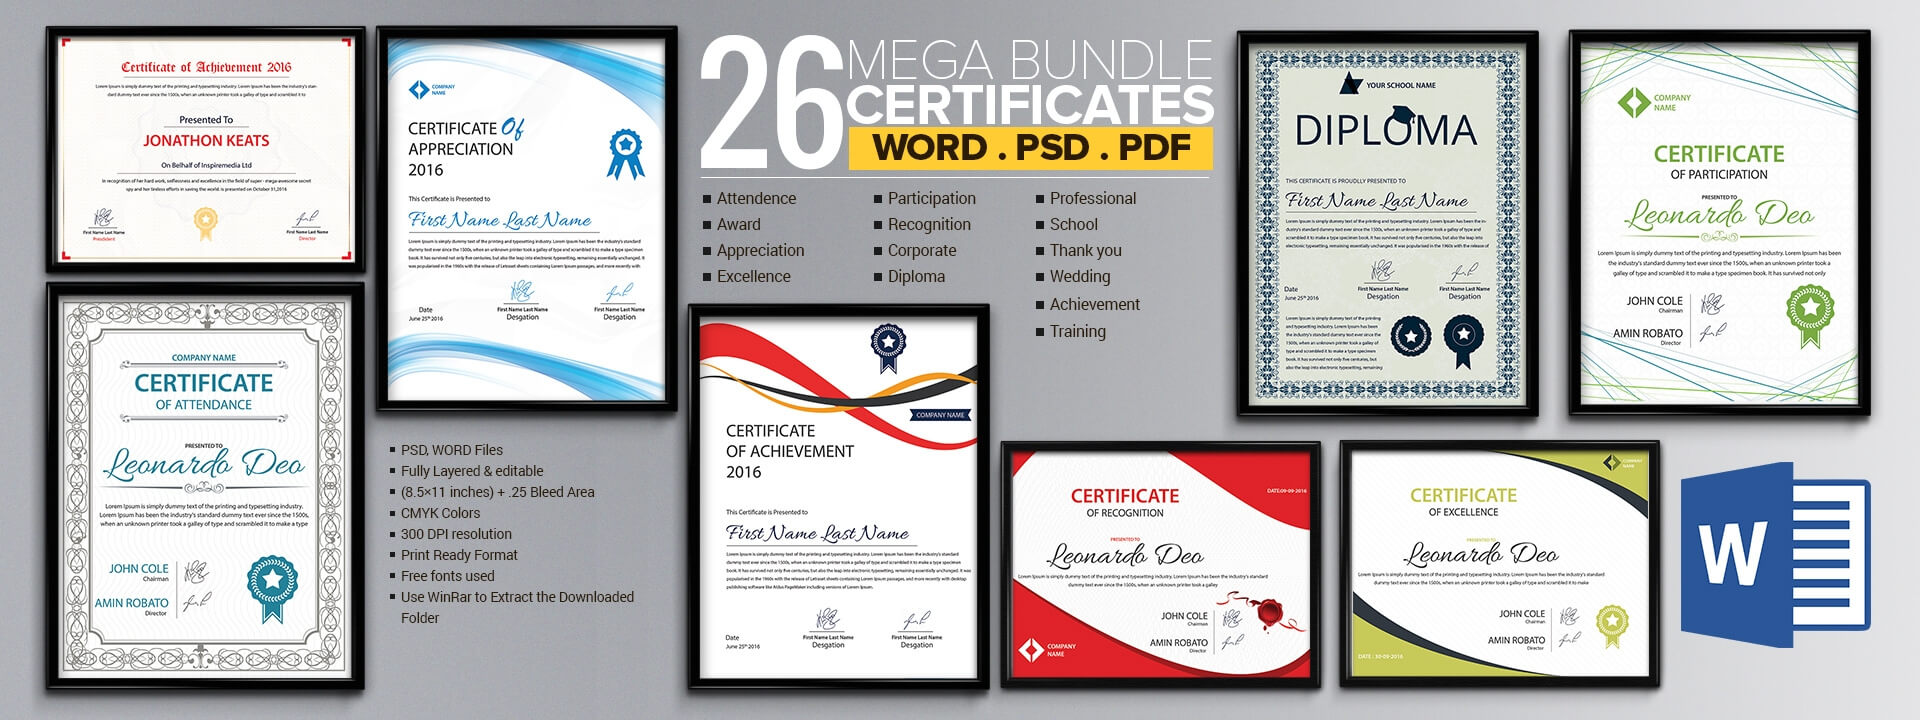 Word Certificate Template – 49+ Free Download Samples Regarding Free Certificate Templates For Word 2007